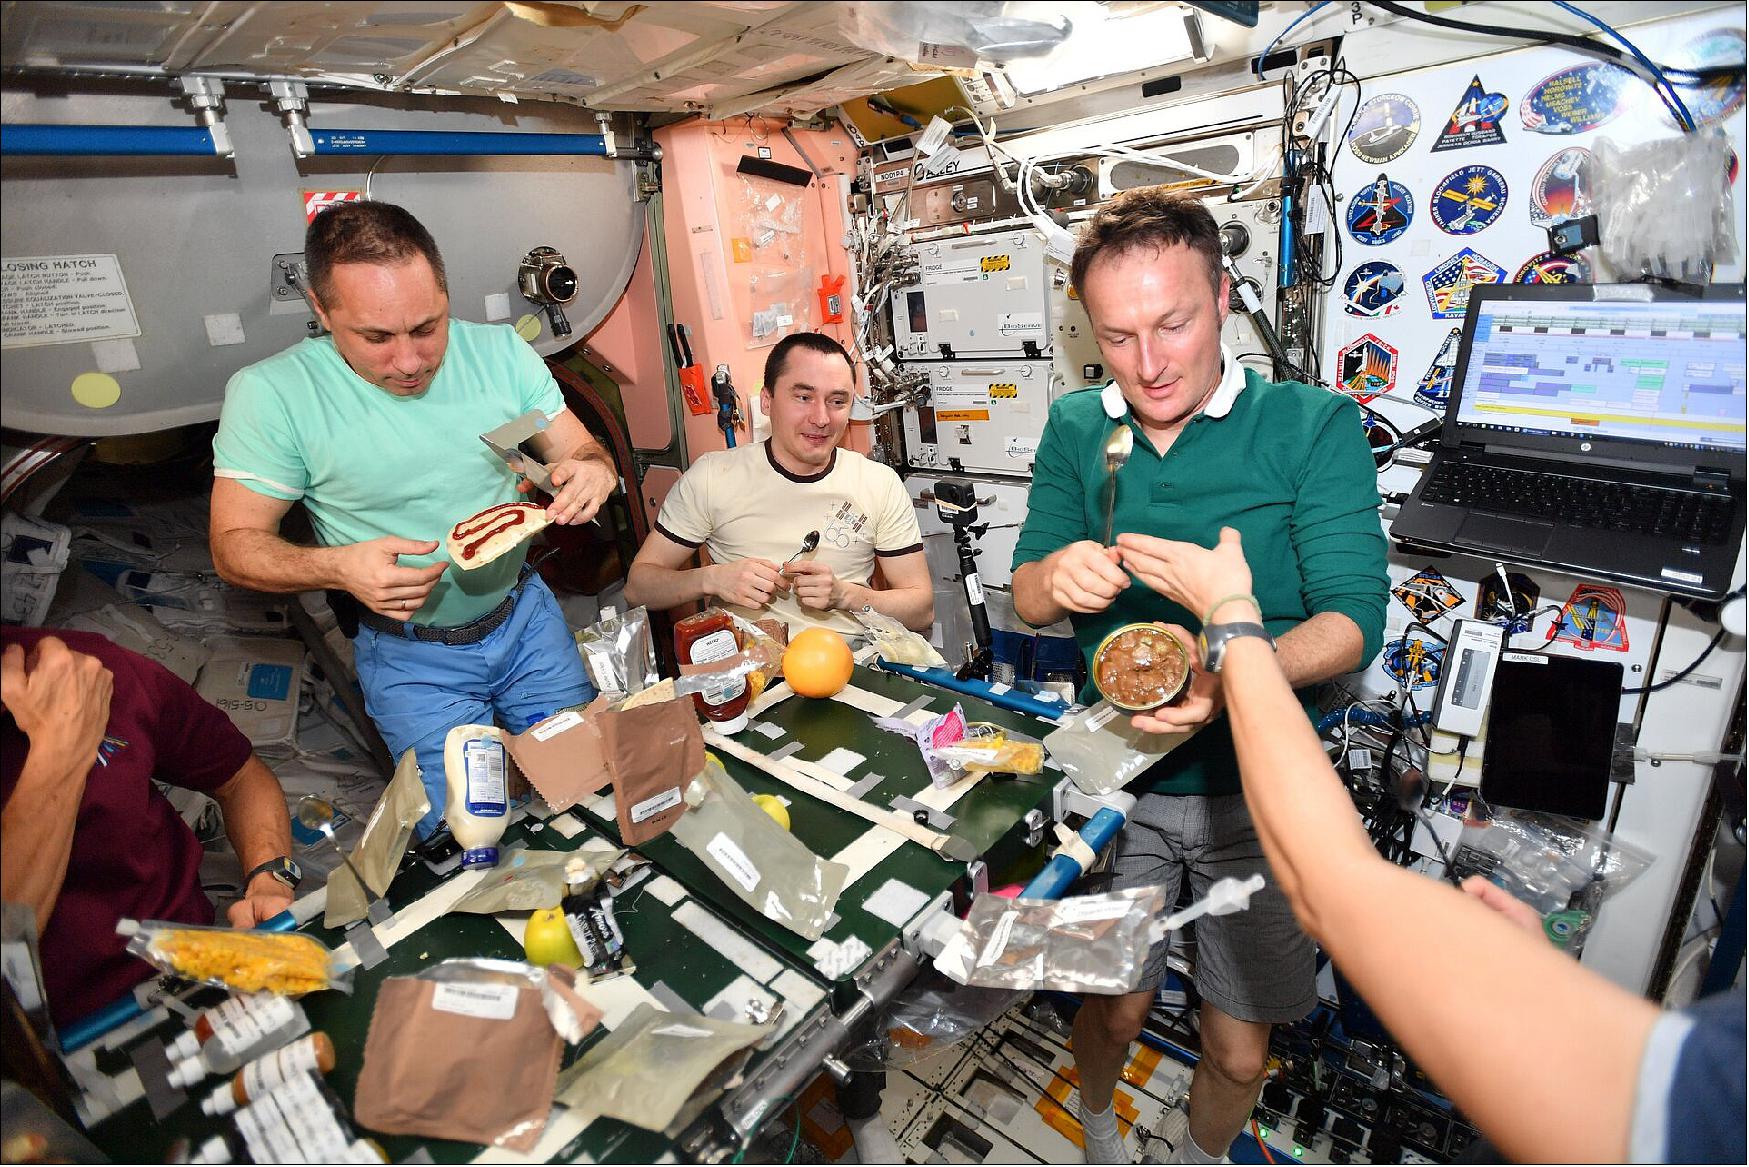 Figure 25: Sampling Rendang. Matthias celebrates American Thanksgiving together with his crew mates on board the International Space Station during his Cosmic Kiss. He posted these images to his social media on 25 November with the caption: "One of the best things about international collaboration? Sharing international celebrations and culture I'm thankful for all my crew mates up here on the International Space Station and everyone supporting our mission from Earth"